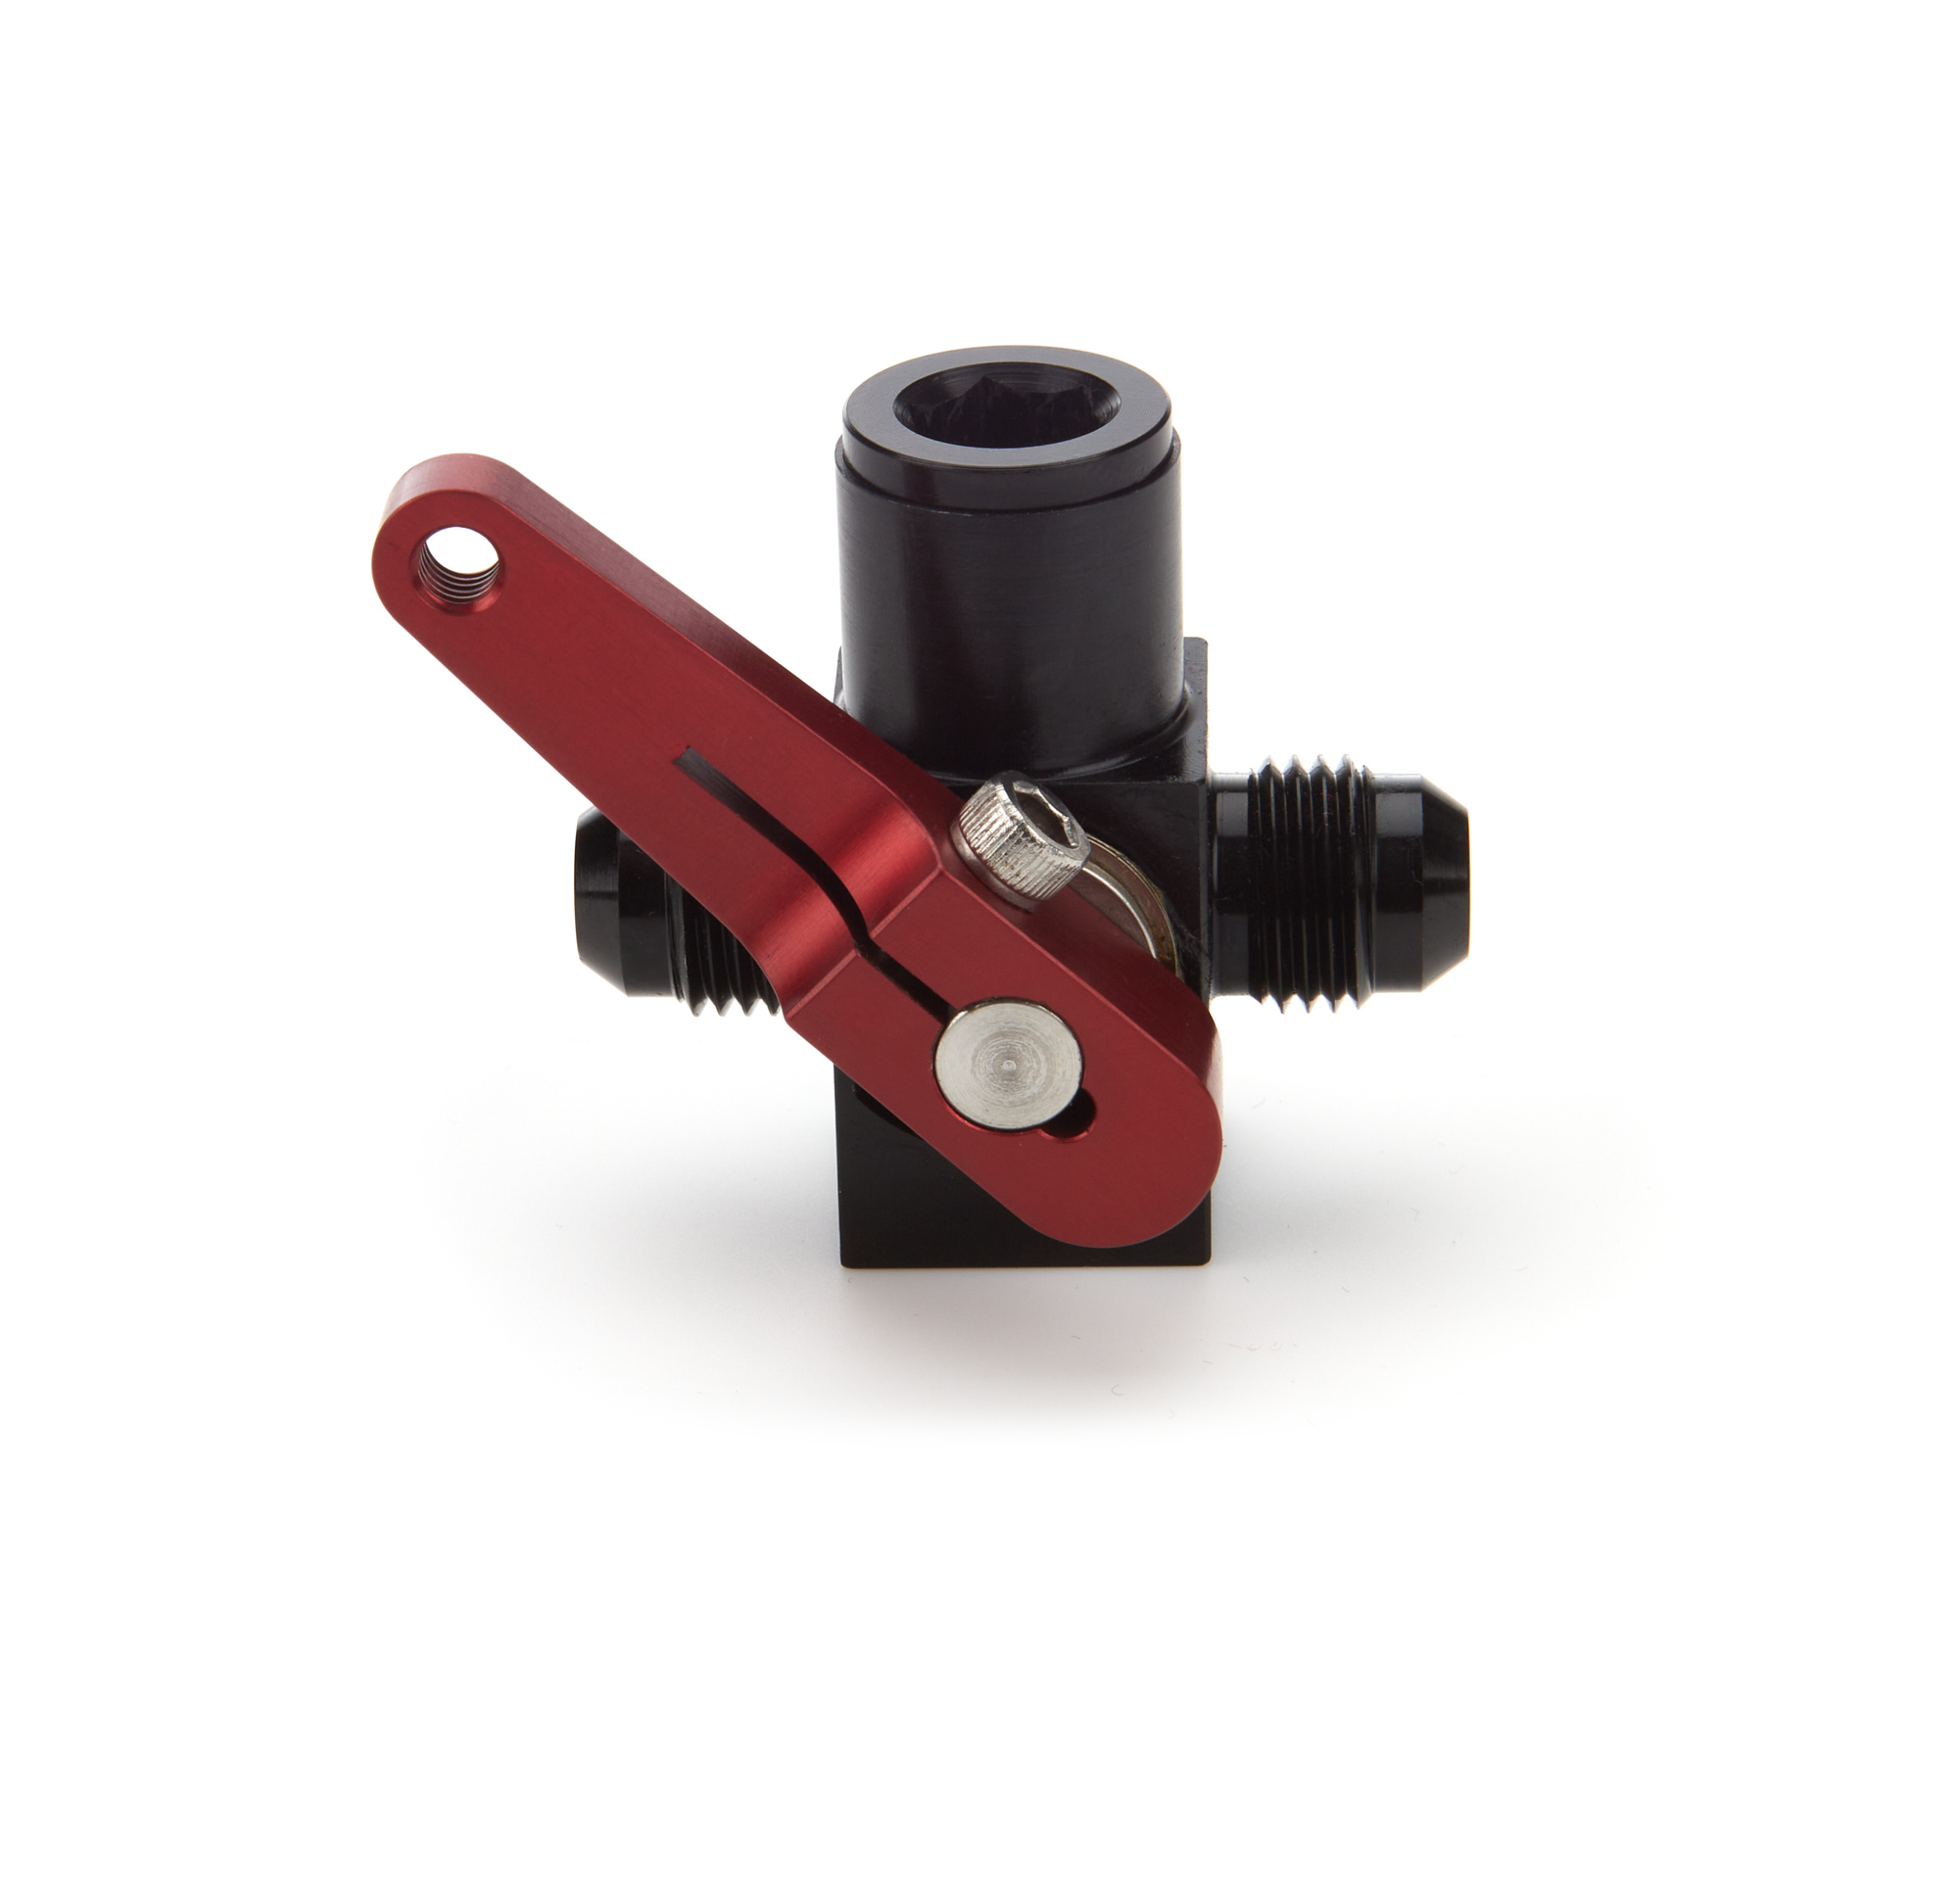 Waterman 44606 Shutoff Valve, Fuel Shutoff, Manual, Dash Mount, 6 AN Male Inlet, 6 AN Male Outlet, Aluminum, Black / Red Anodized, Each